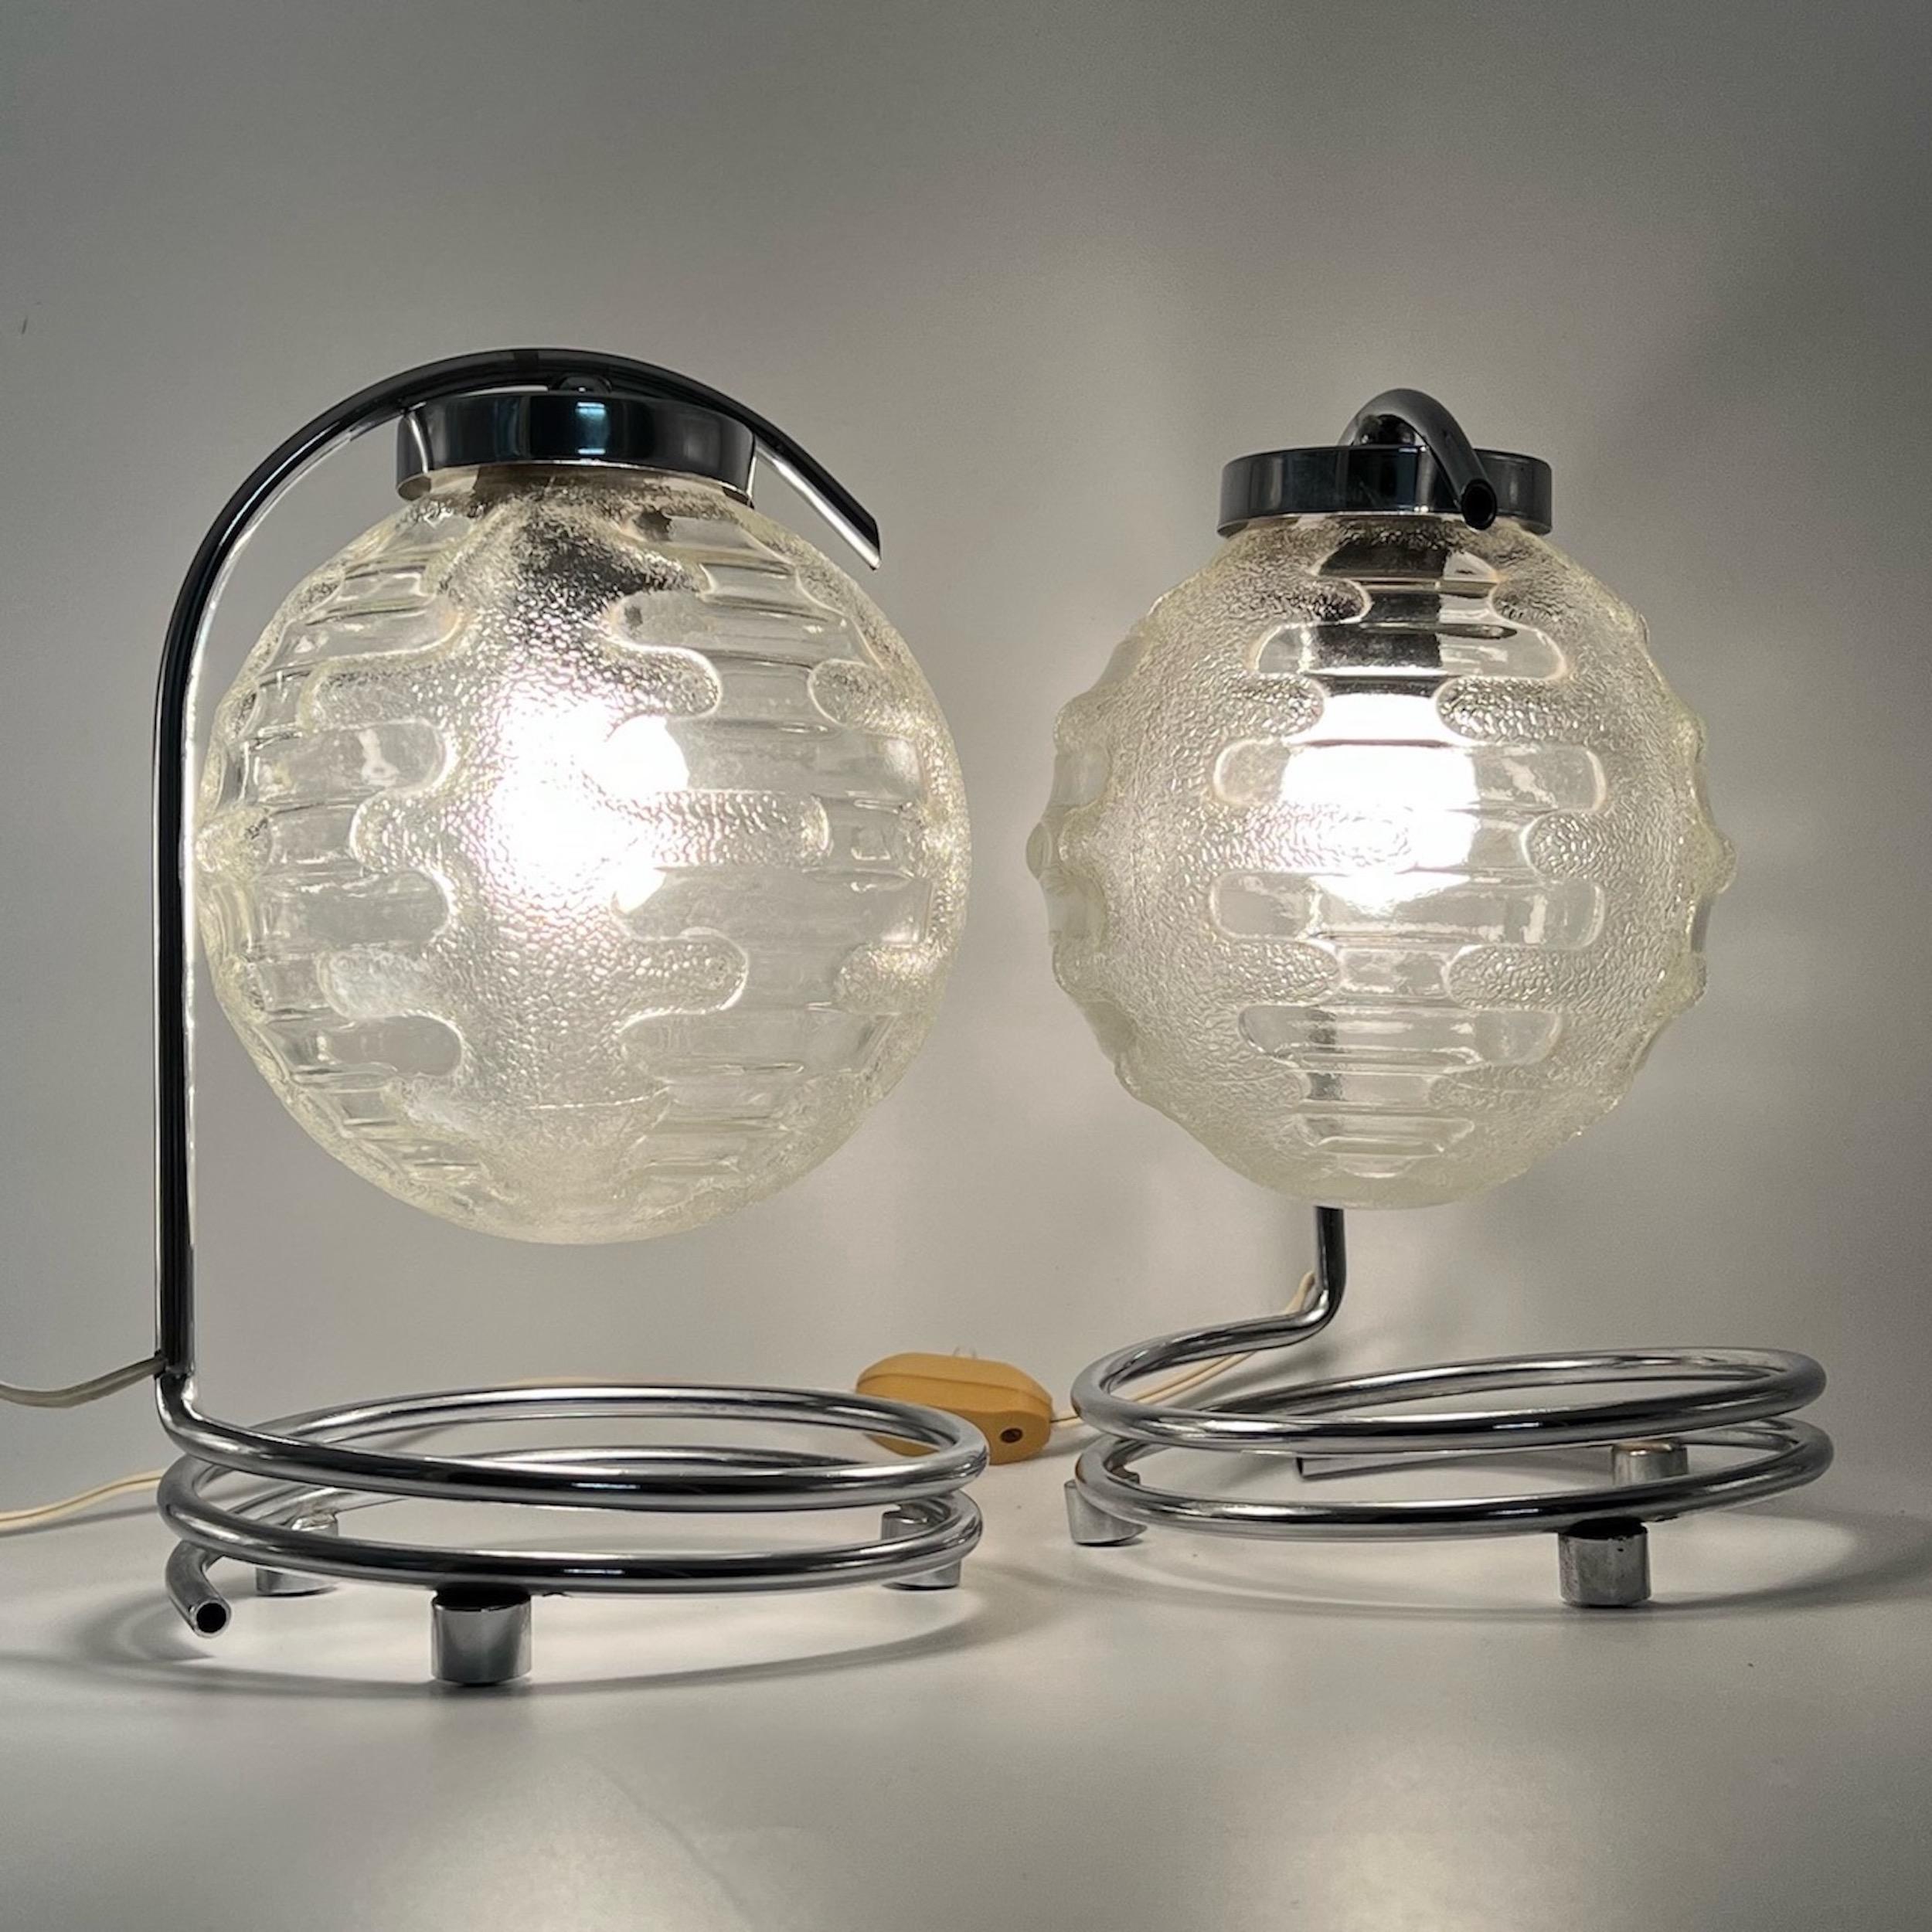 Beautiful pair of 70s desk or bedside lamps by Richard Essig.

The base is masterfully conceived with chromed metal spyrals, and the lamp shade is made of thick, crafted glass, for a gorgeous visual impact.

Excellent vintage conditions, perfectly